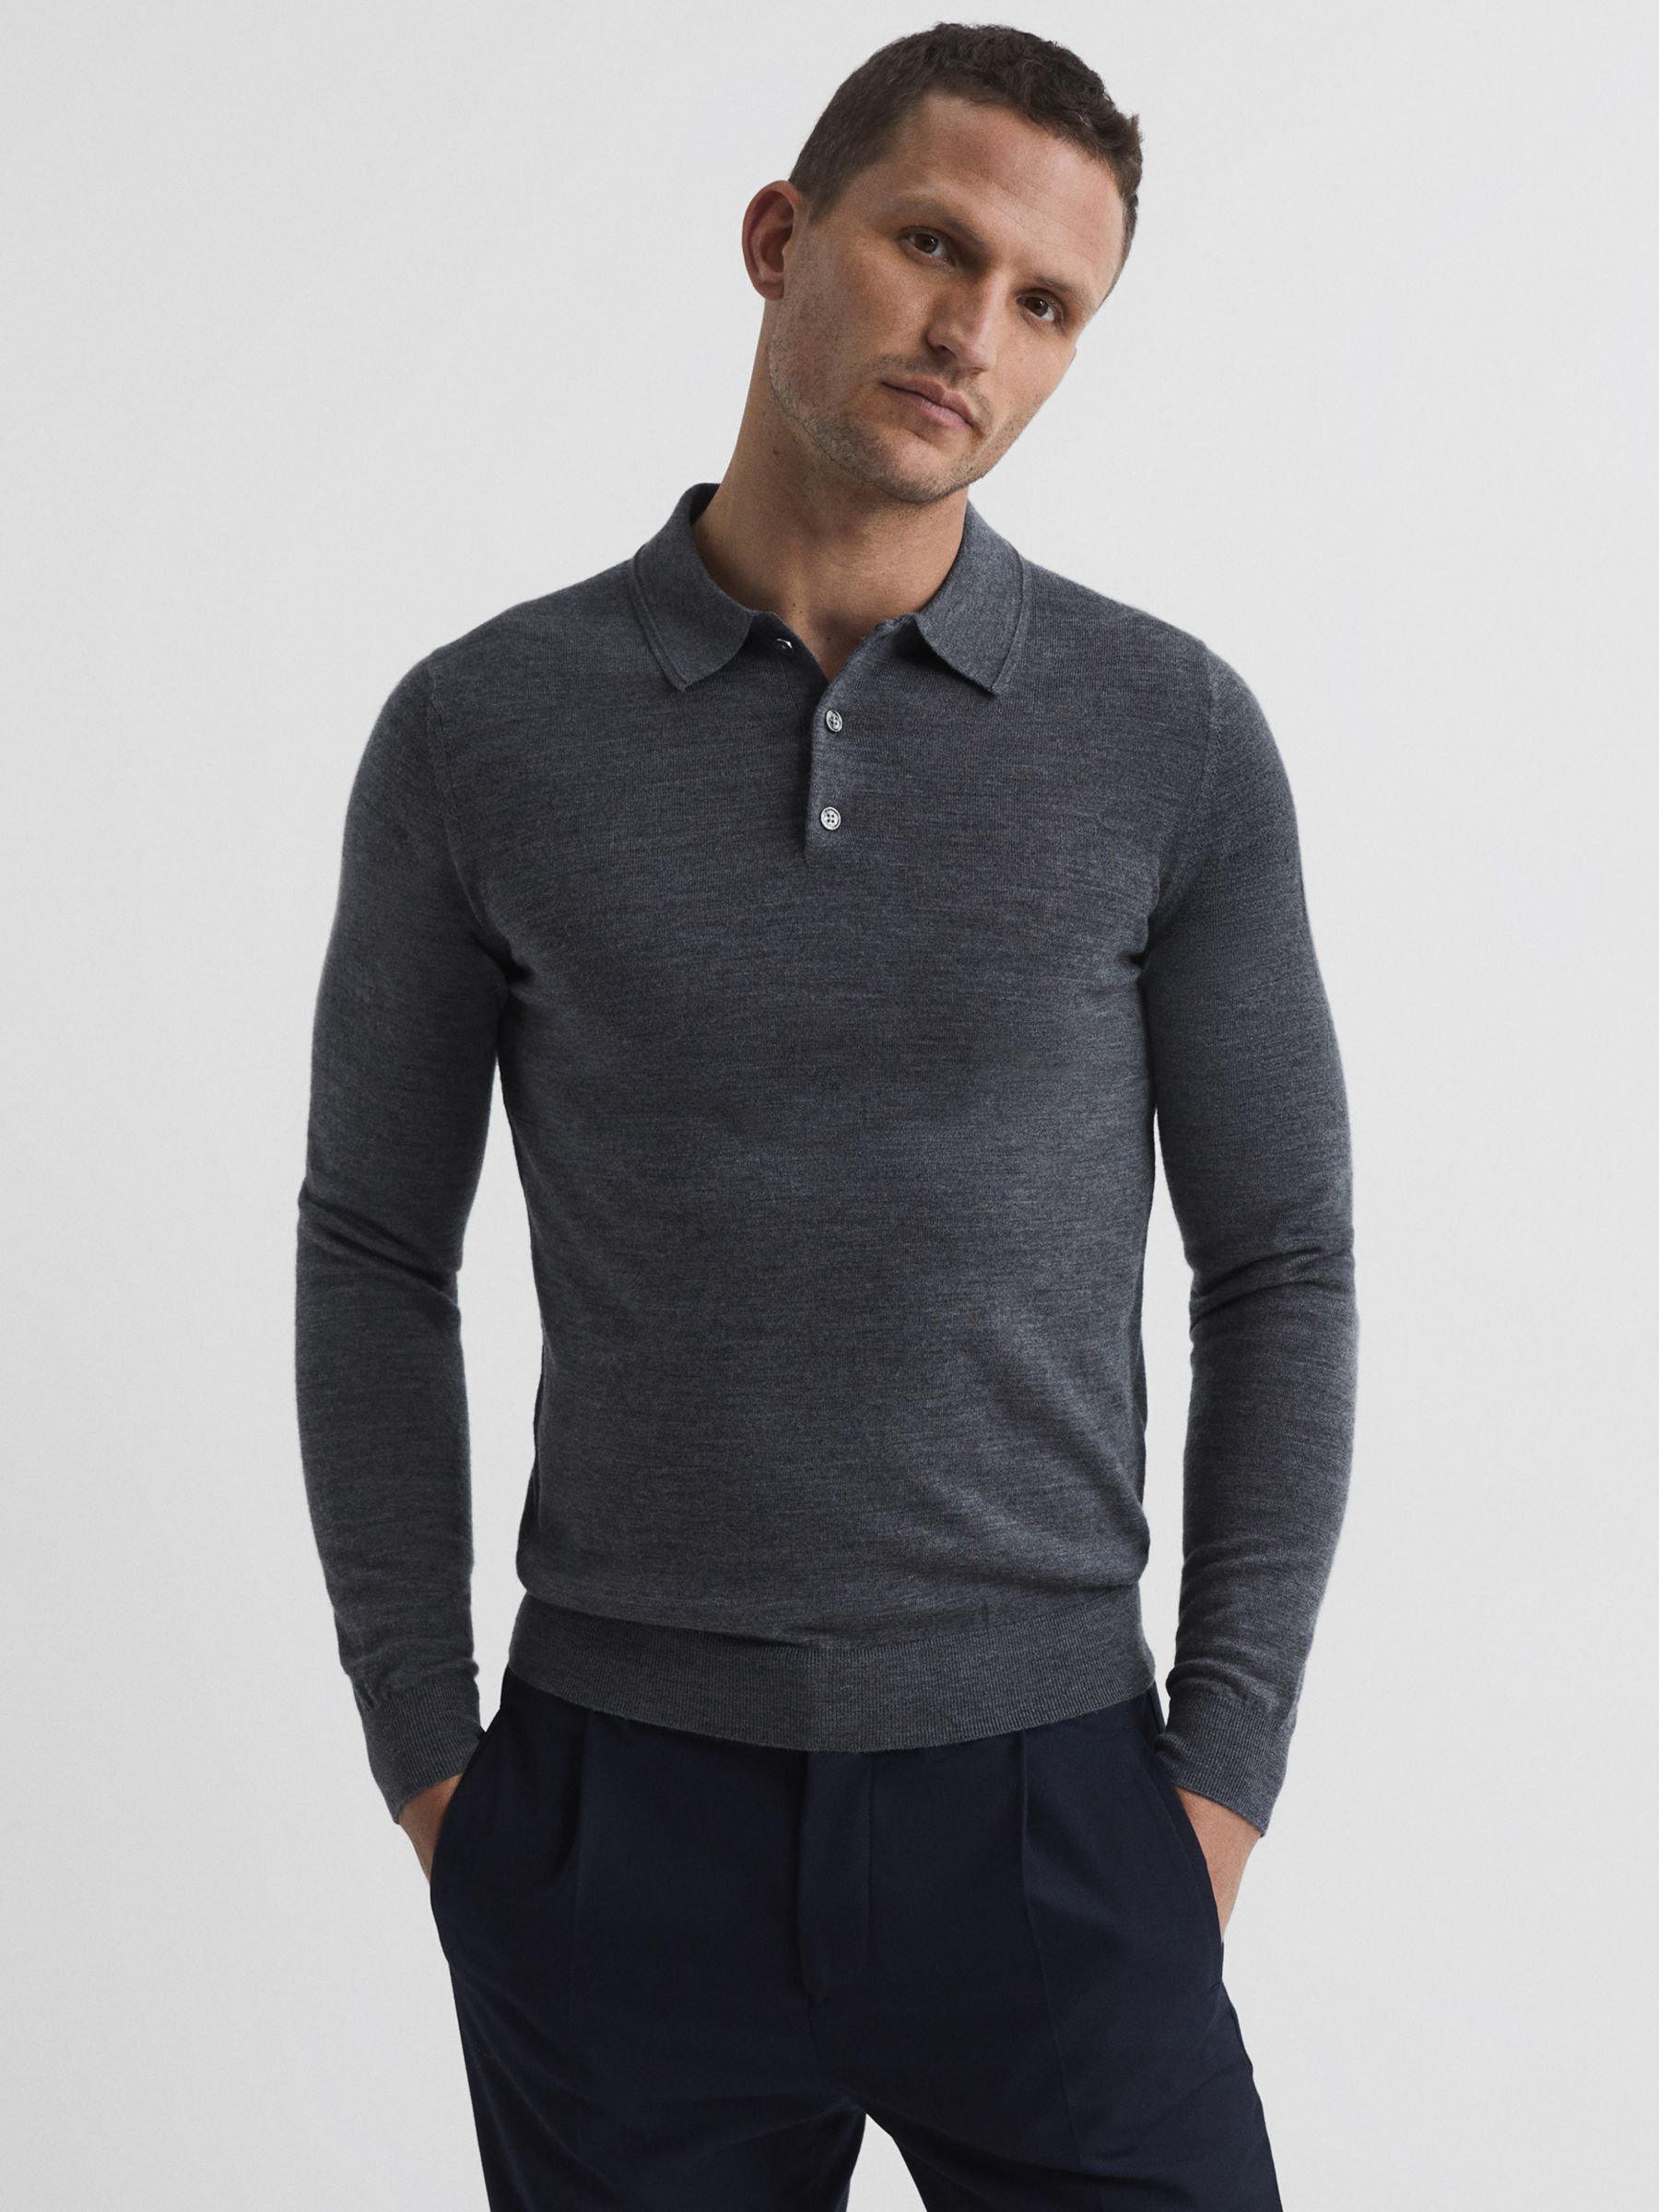 Reiss Trafford Knitted Wool Long Sleeve Polo Top, Mid Grey Melange, XS